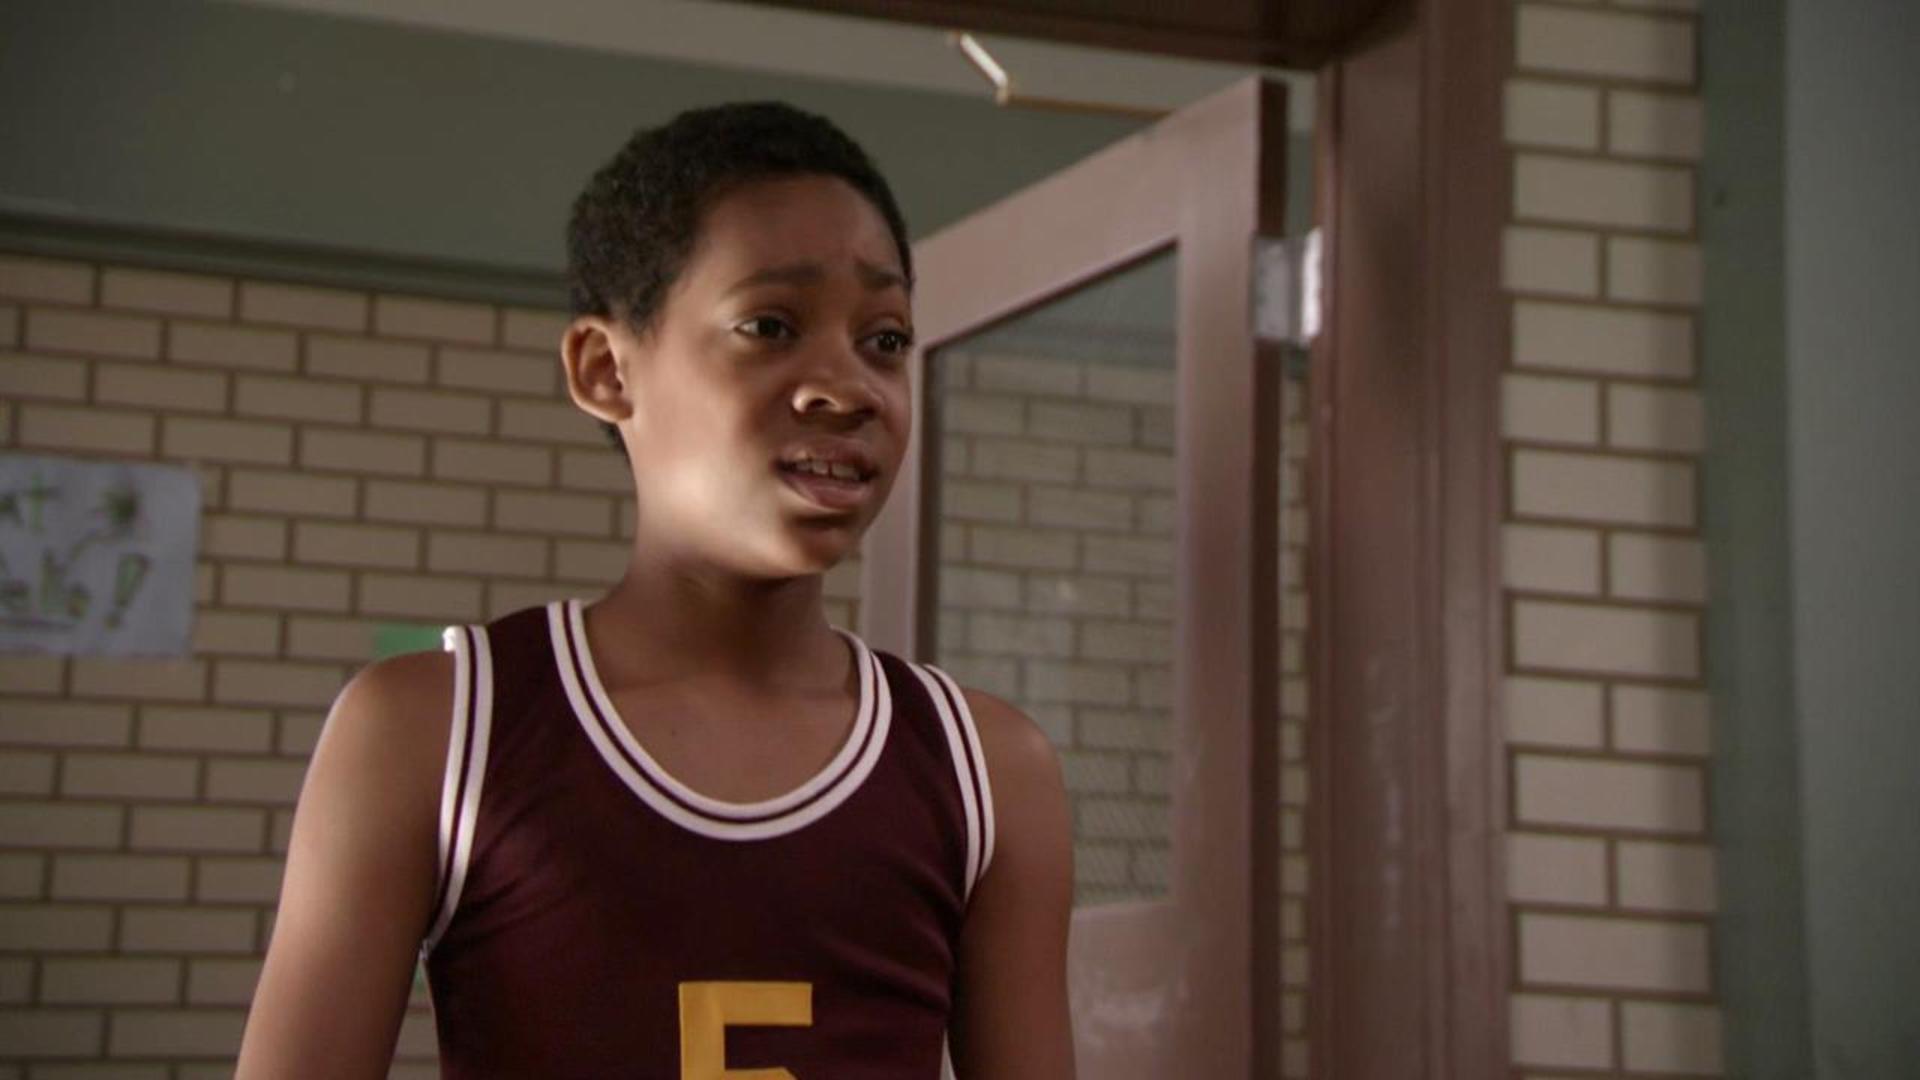 Watch Everybody Hates Chris Season 1 Episode 3: Everybody Hates Basketball show on CBS All Access